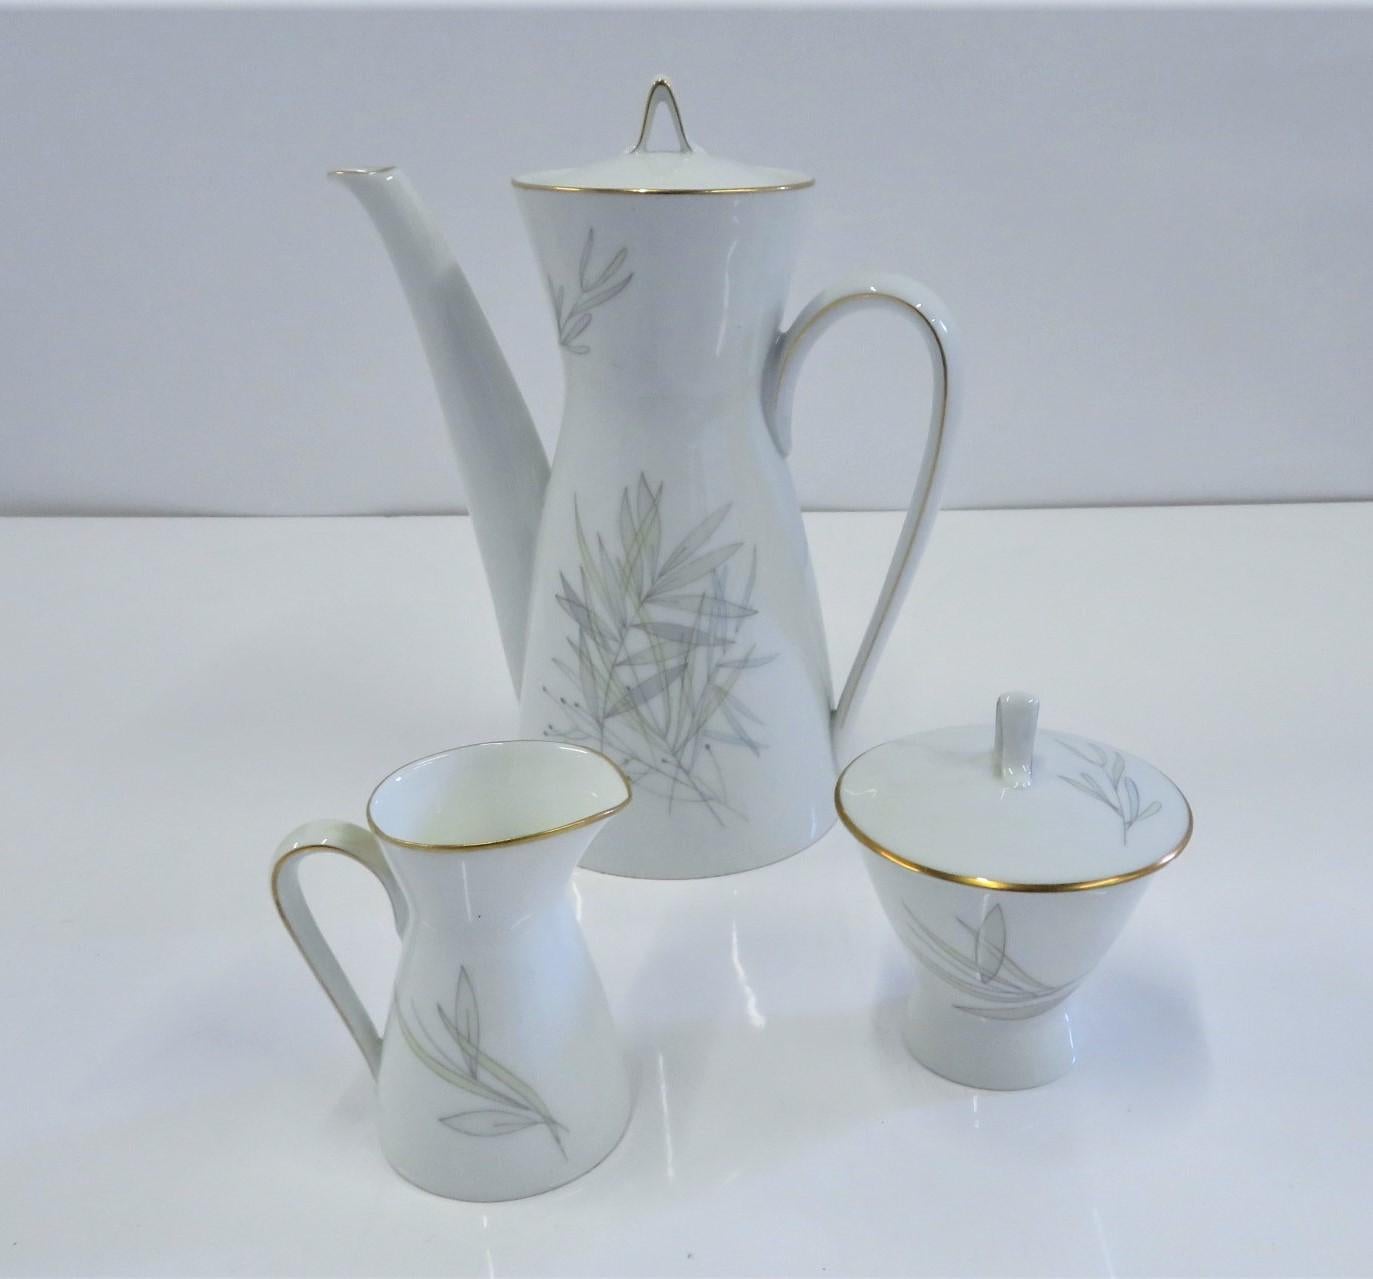 A Mid-Century Modern porcelain coffee service set consisting of coffee pot, creamer and lidded sugar by Rosenthal in the GRASSES pattern with the iconic “2000” form designed by Raymond Loewy in the 1950s. This lovely pattern is decorated with gray,